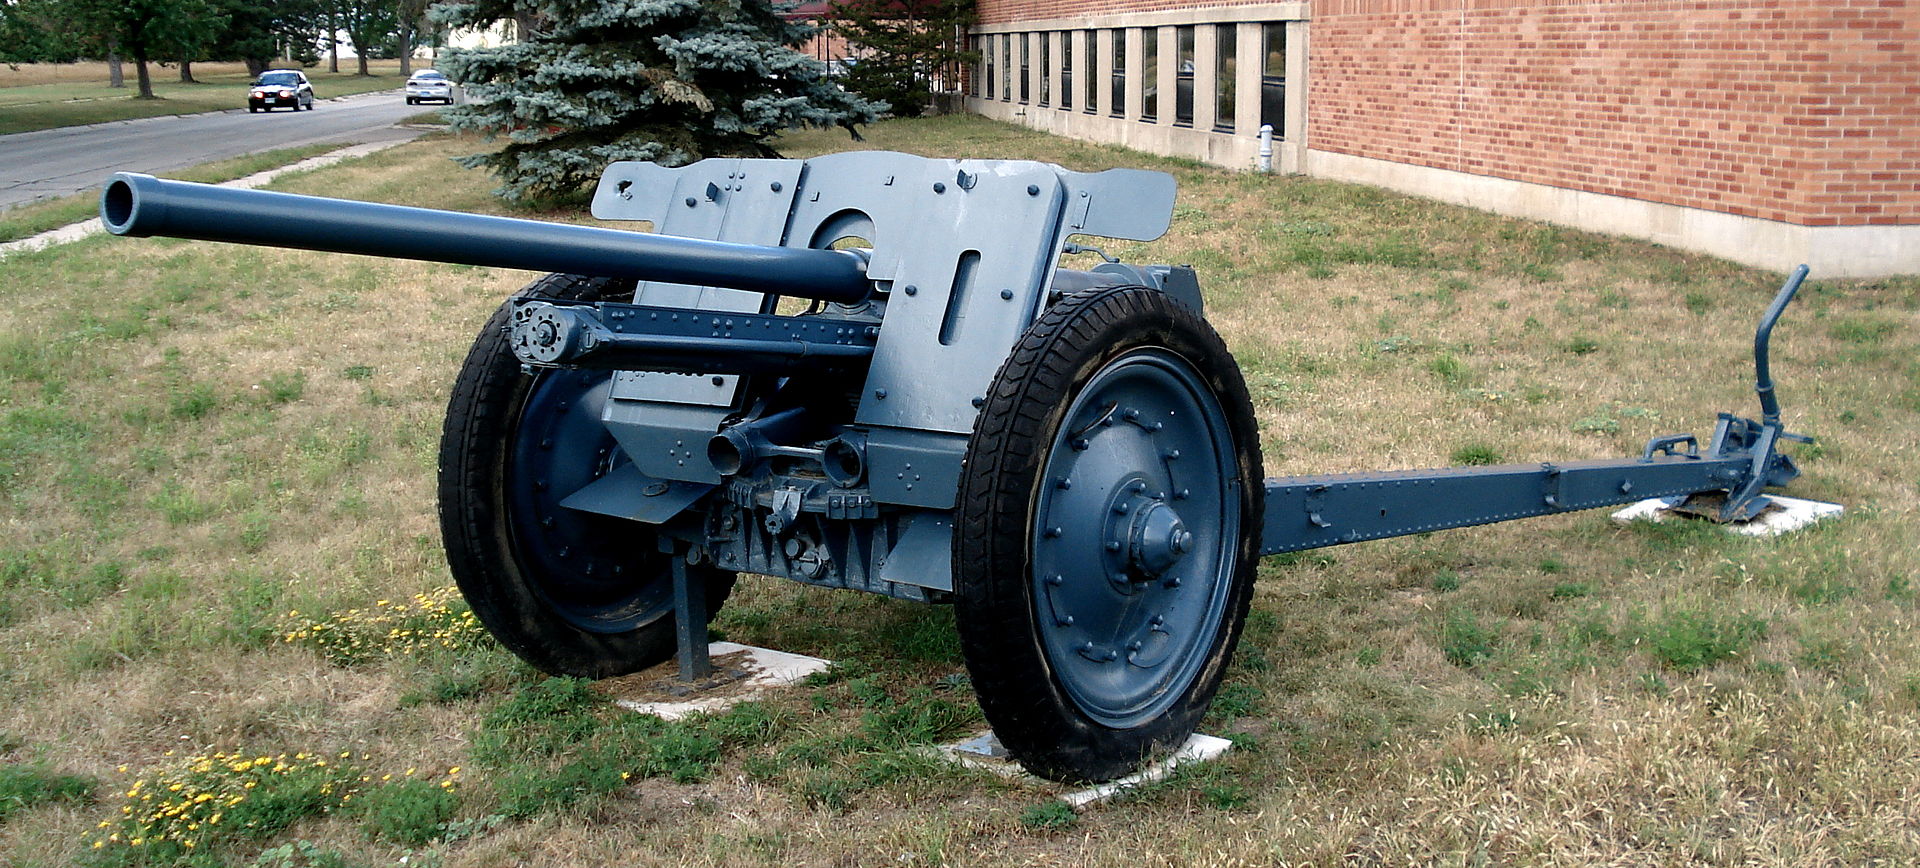 photo of 7.62cm Pak 36(r) L/51 from By Balcer~commonswiki - Own work, CC BY 2.5, https://commons.wikimedia.org